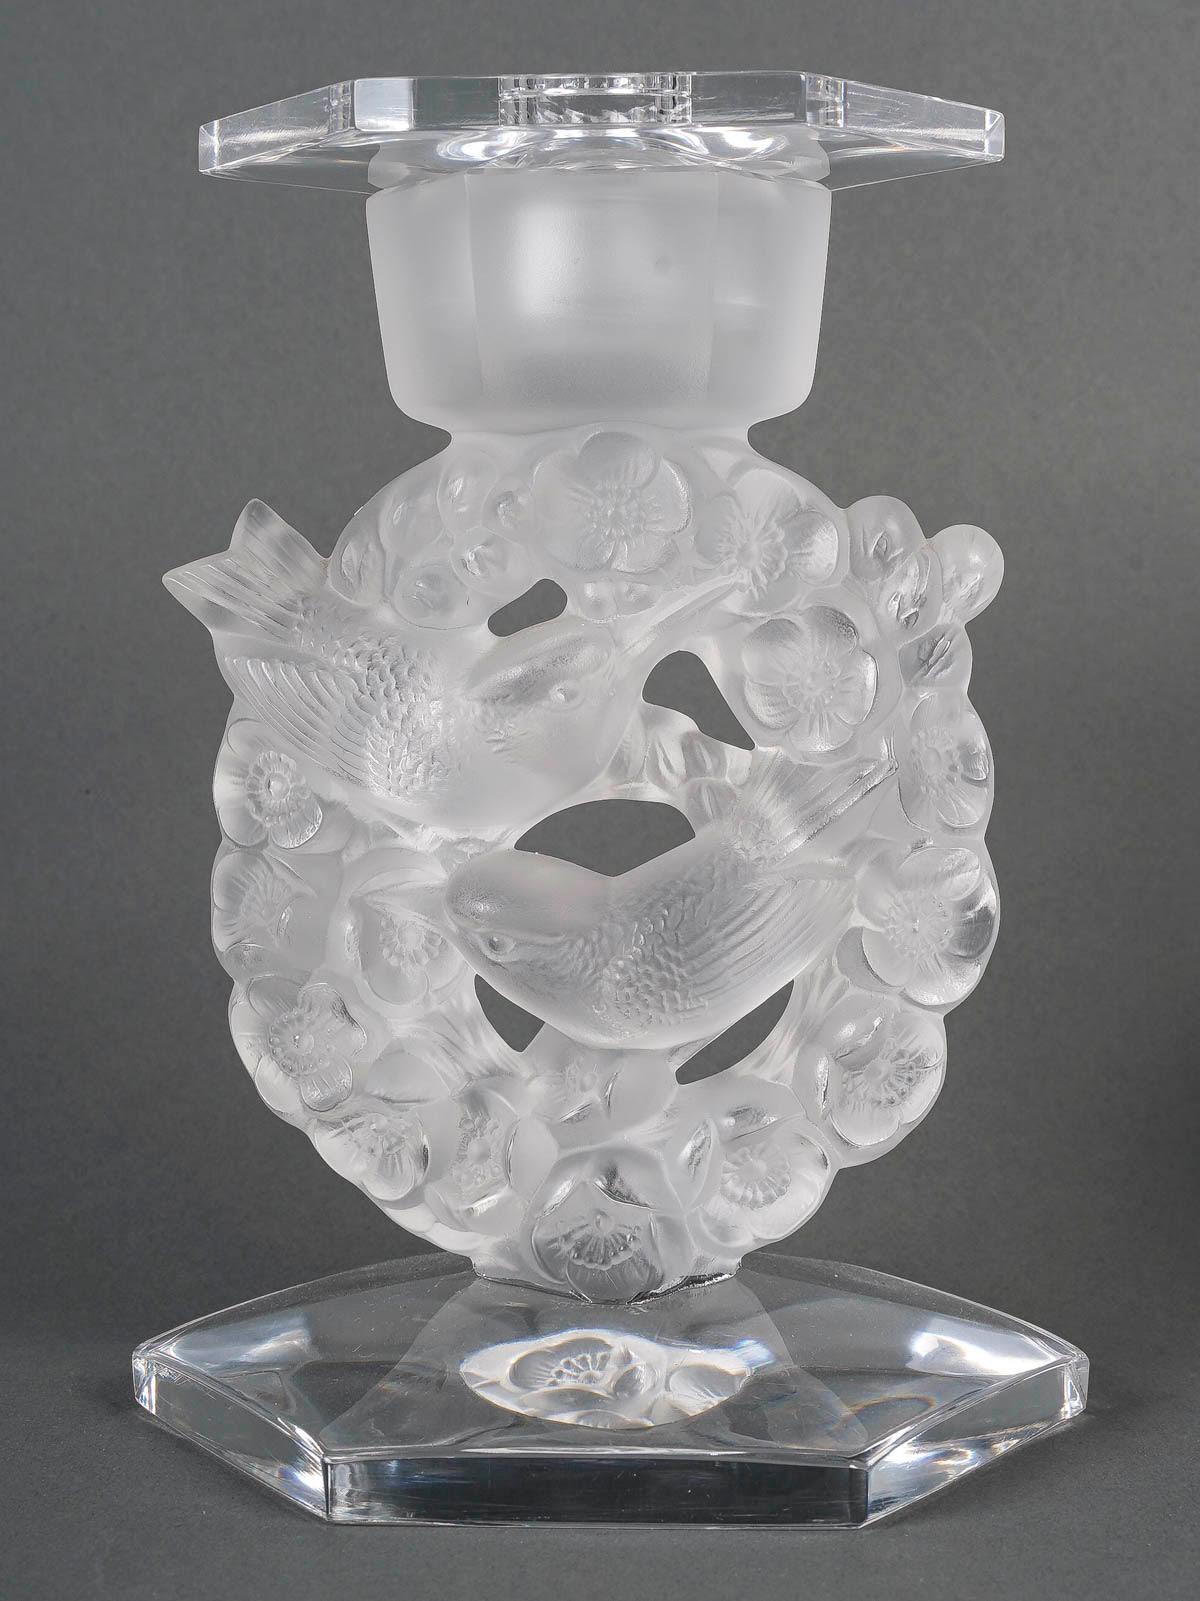 Pair of Lalique France crystal candelabras, 20th Century.

A pair of Lalique France crystal candelabra, flowers and birds, 20th Century.
h:18cm, d: 13cm